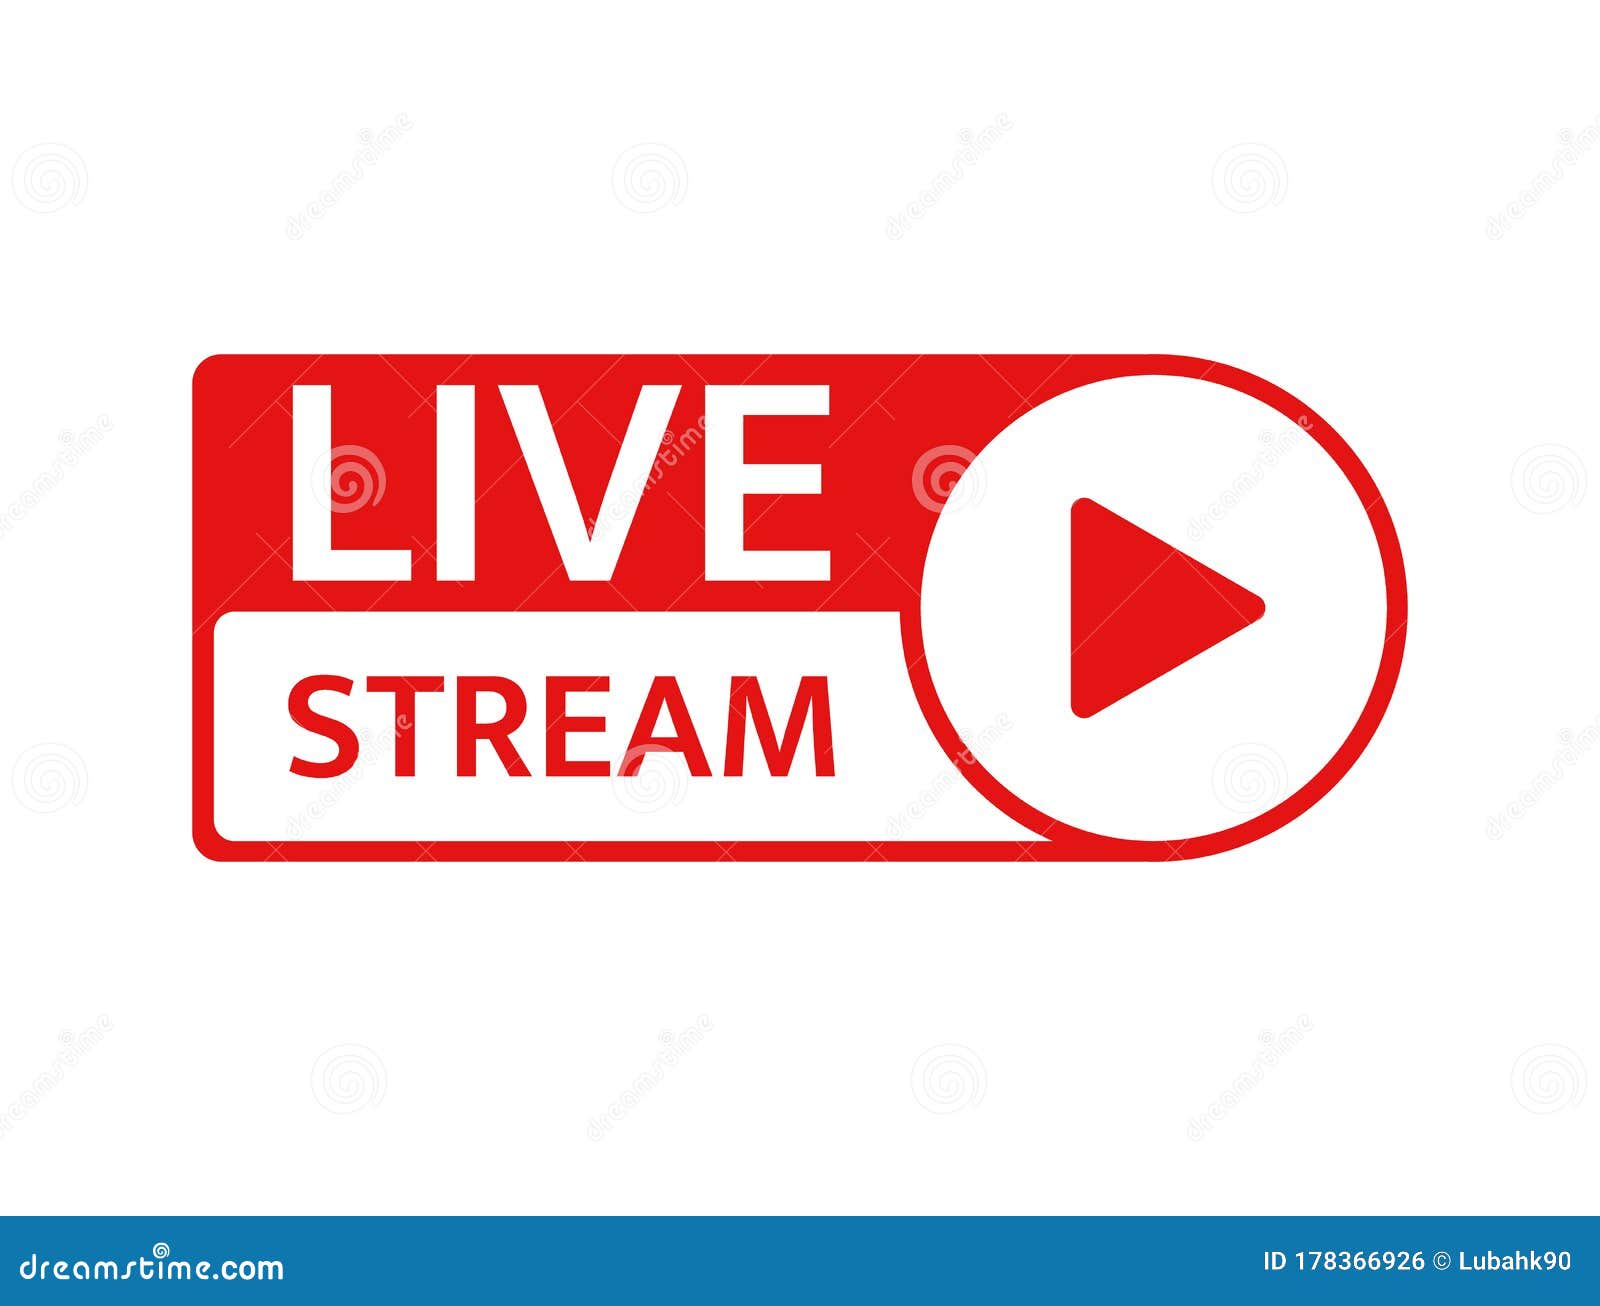 Live Stream Icon. Live Streaming, Video, News Symbol on White Background.  Social Media Template Stock Vector - Illustration of music, click: 178366926